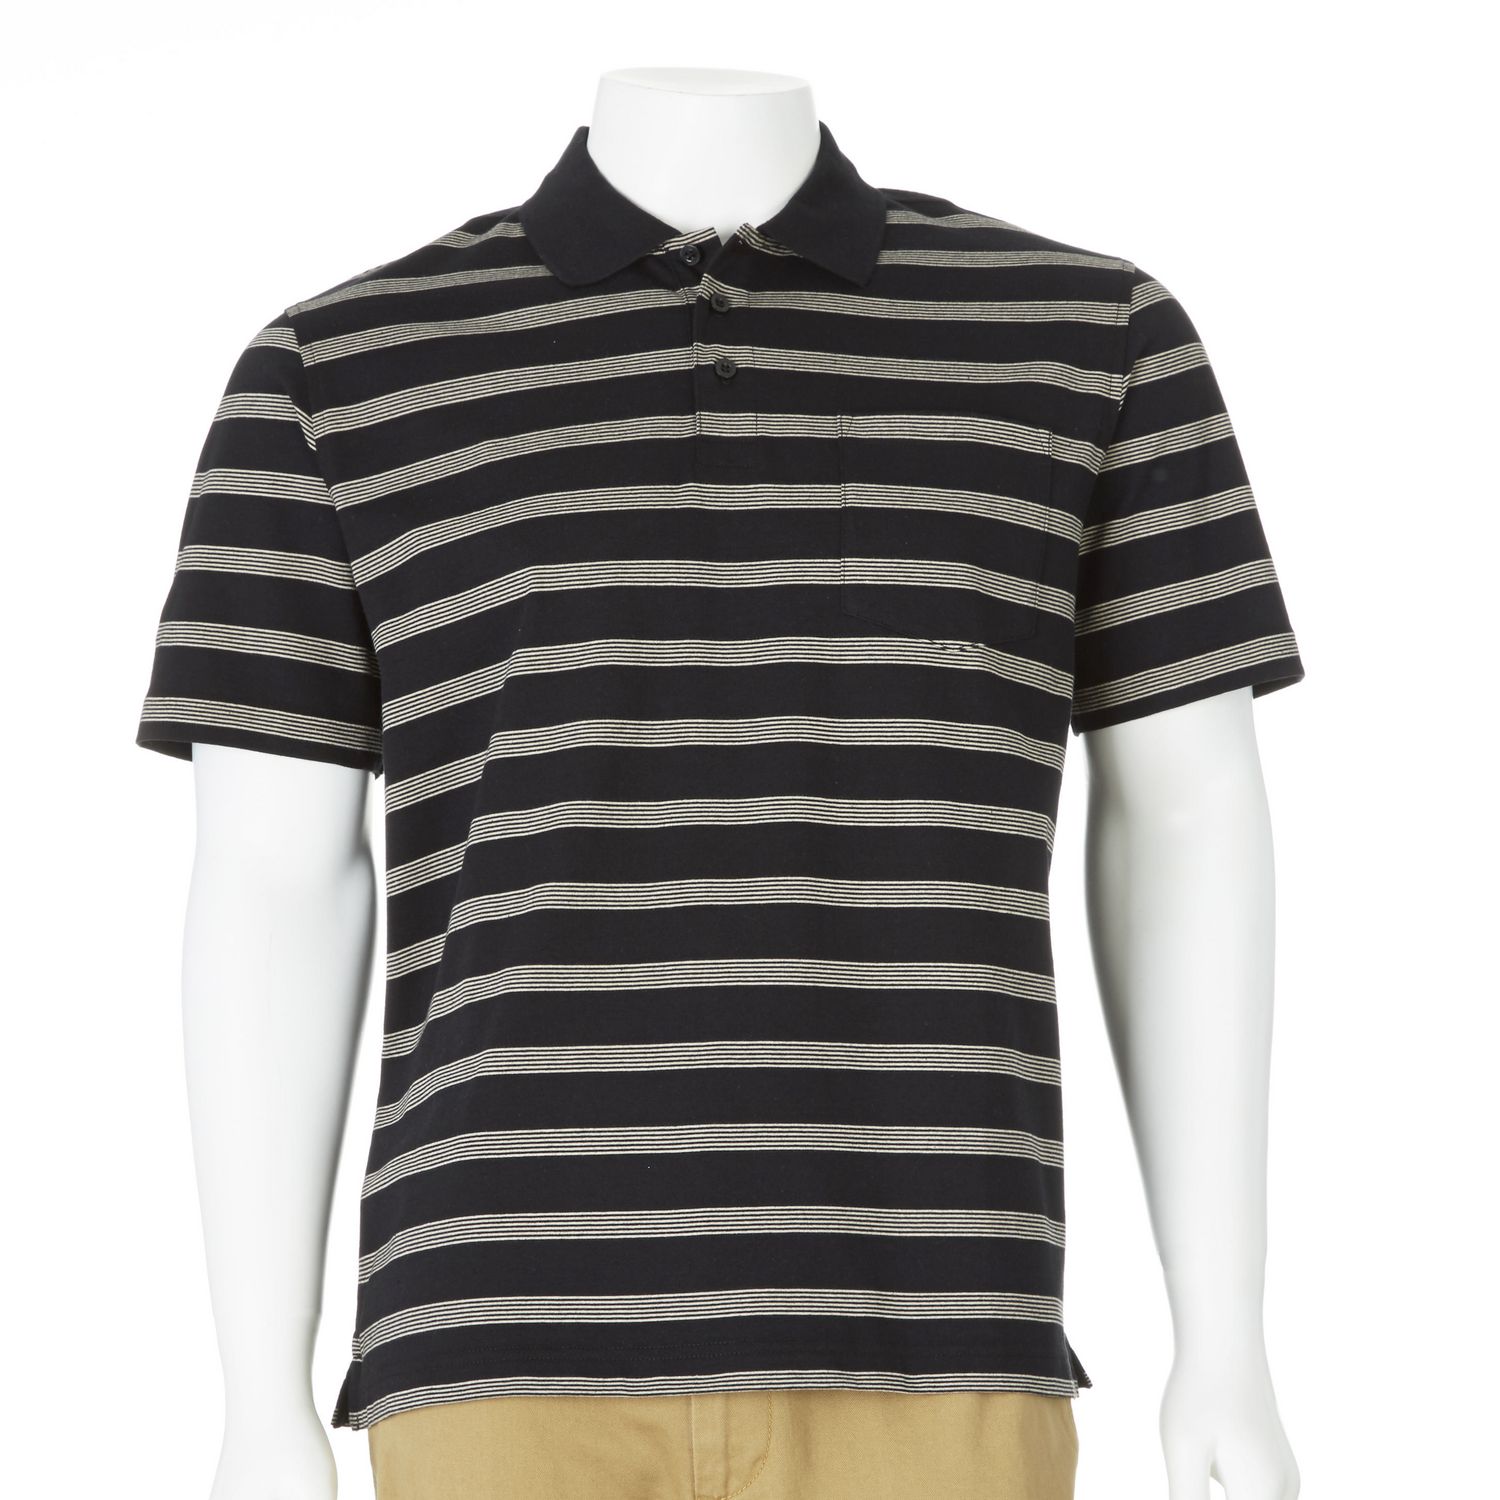 George Men’s Patterned Polo Shirt | Walmart Canada